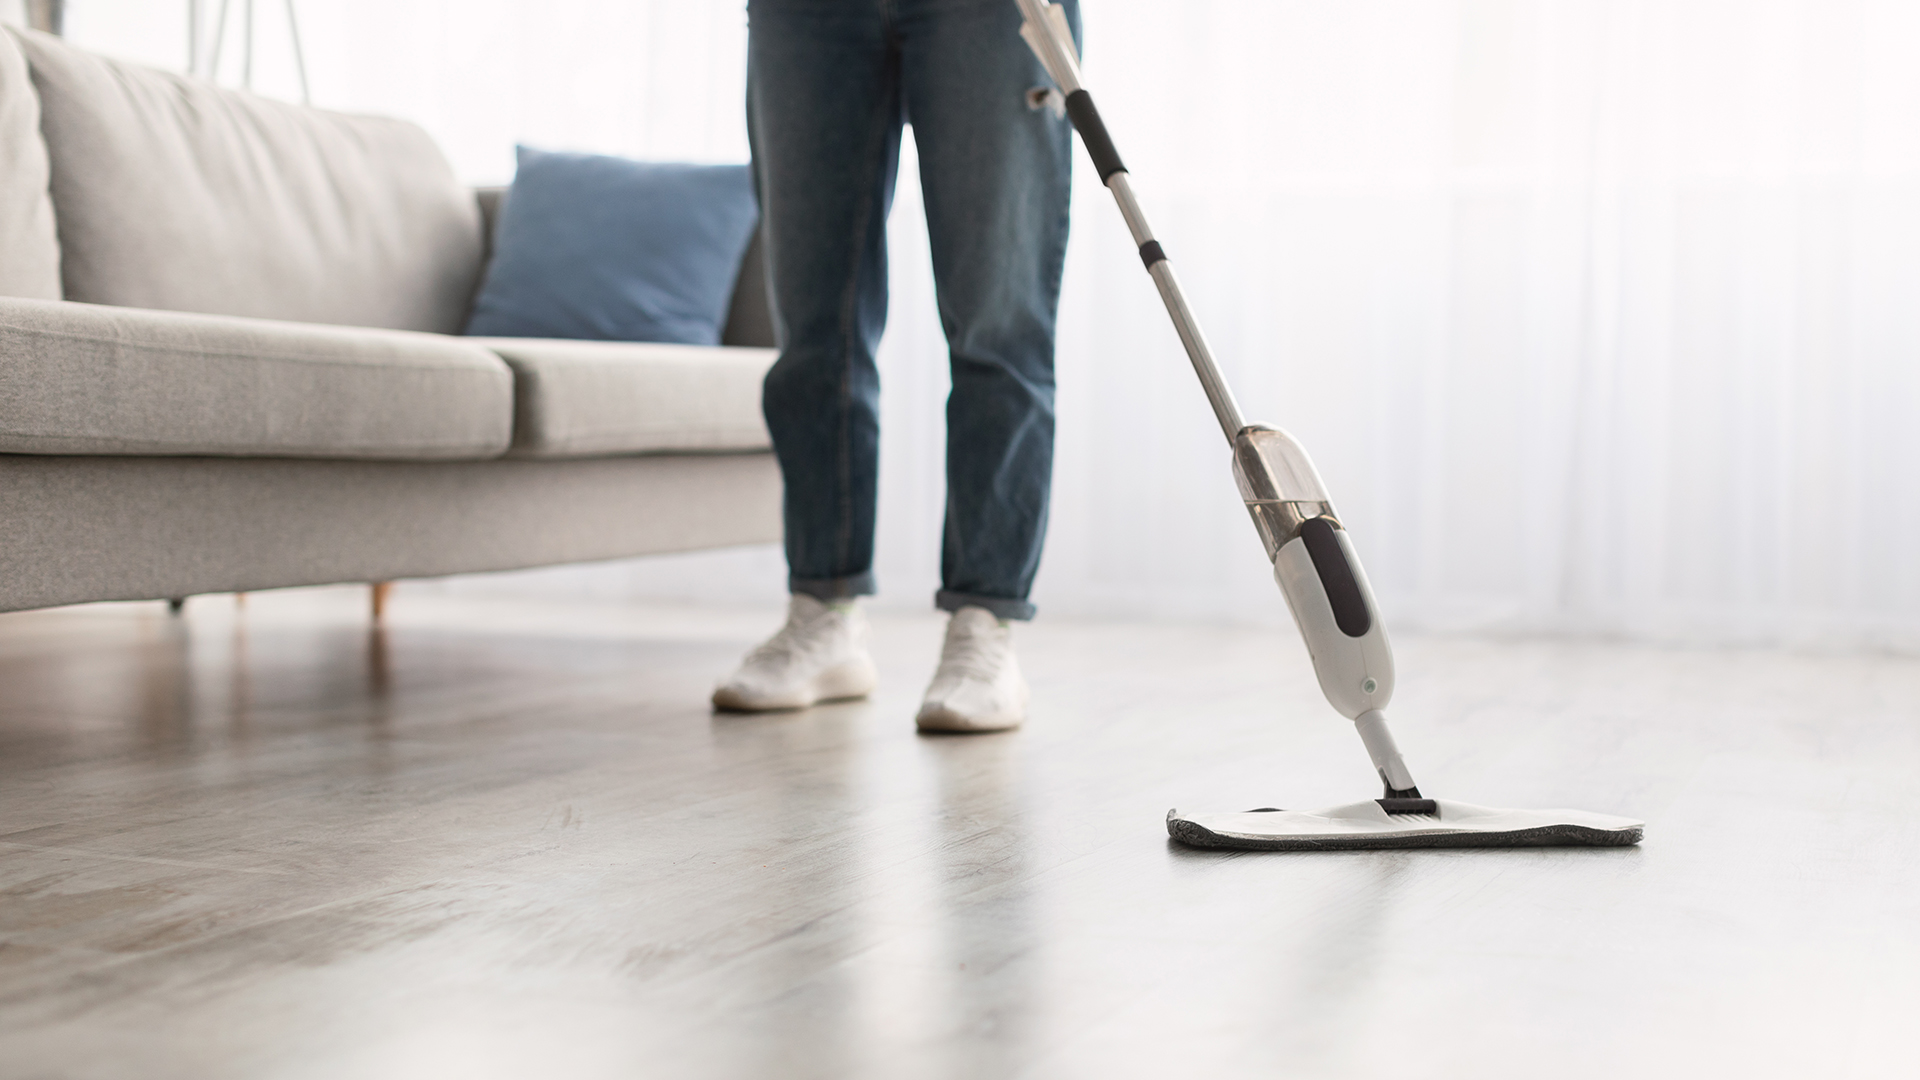 How to use a steam mop